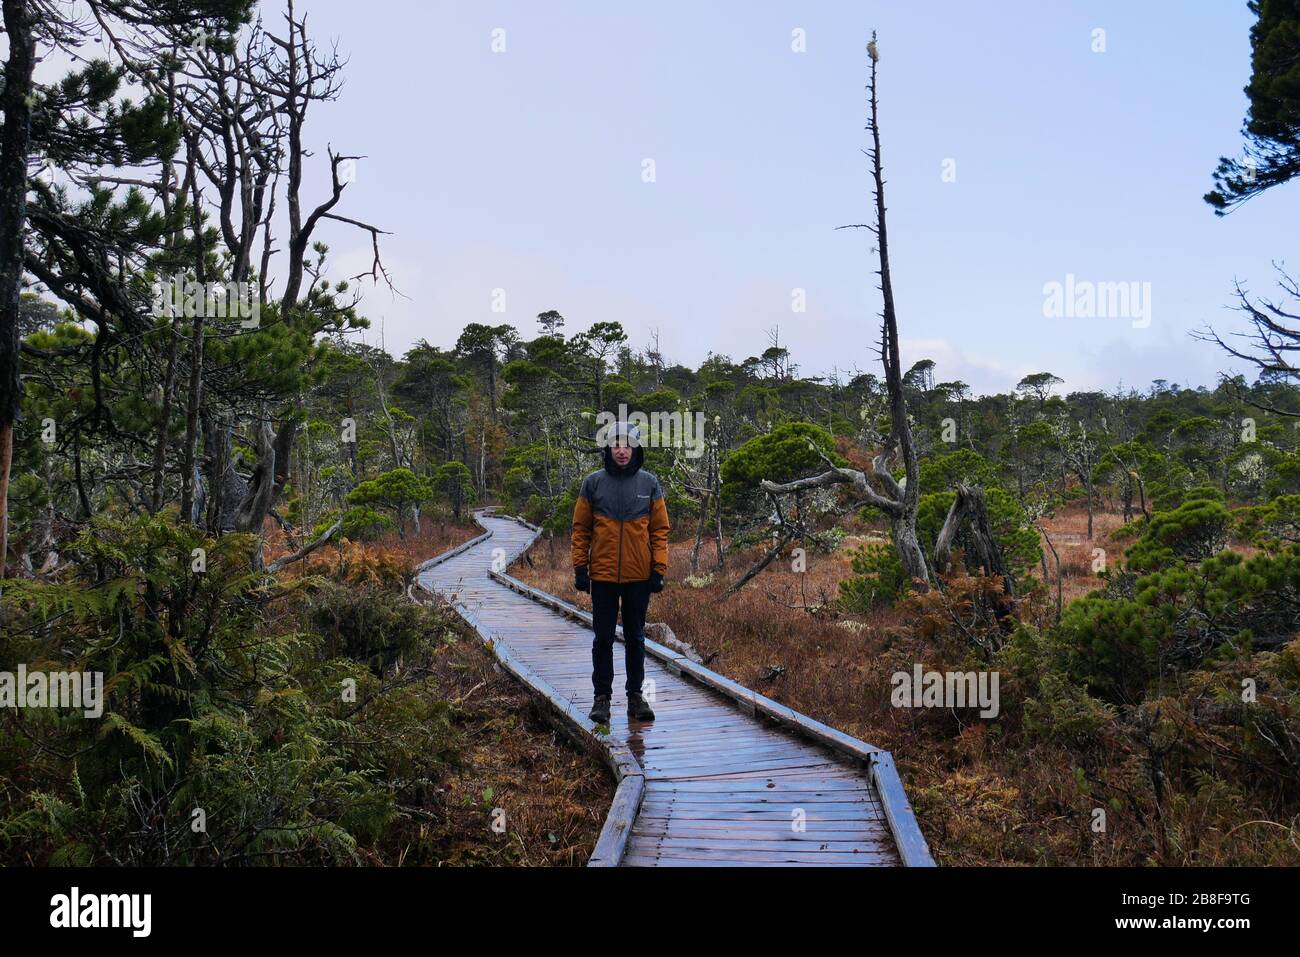 Man stood alone in the rain, on boardwalk through bog with orange colored moss and stunted trees Stock Photo